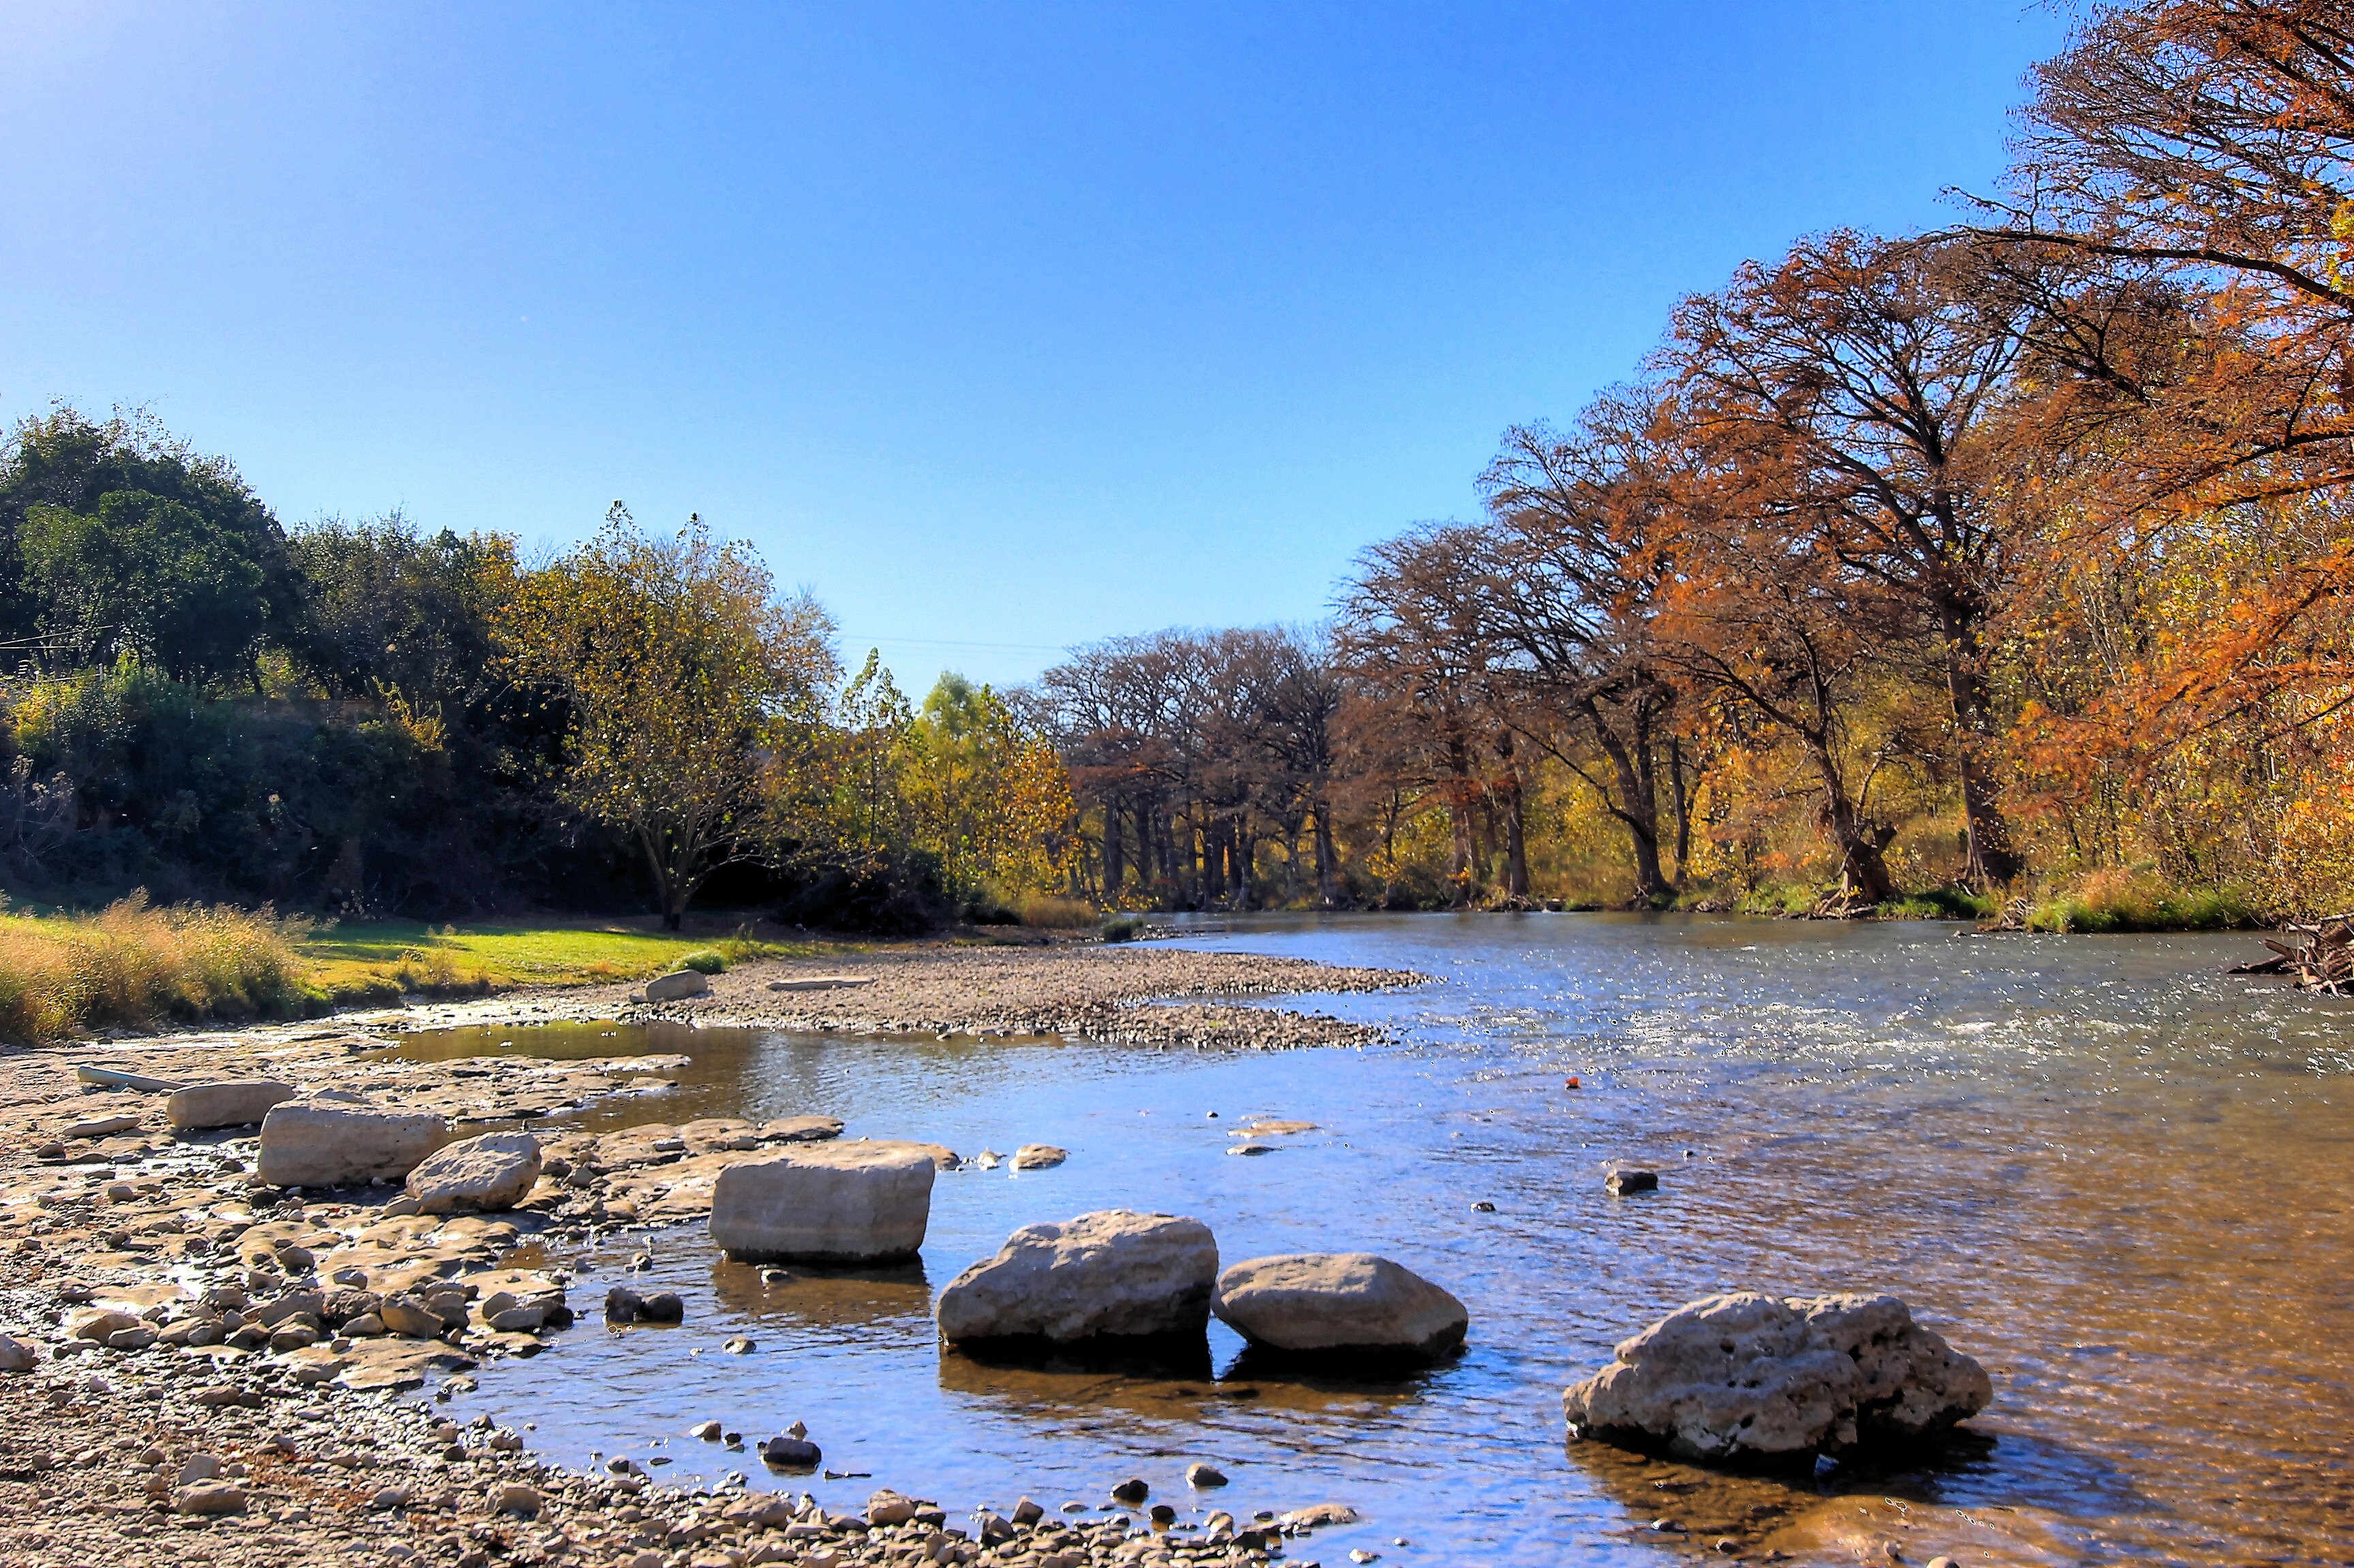 Enjoy cooling off in the beautiful Guadalupe River.